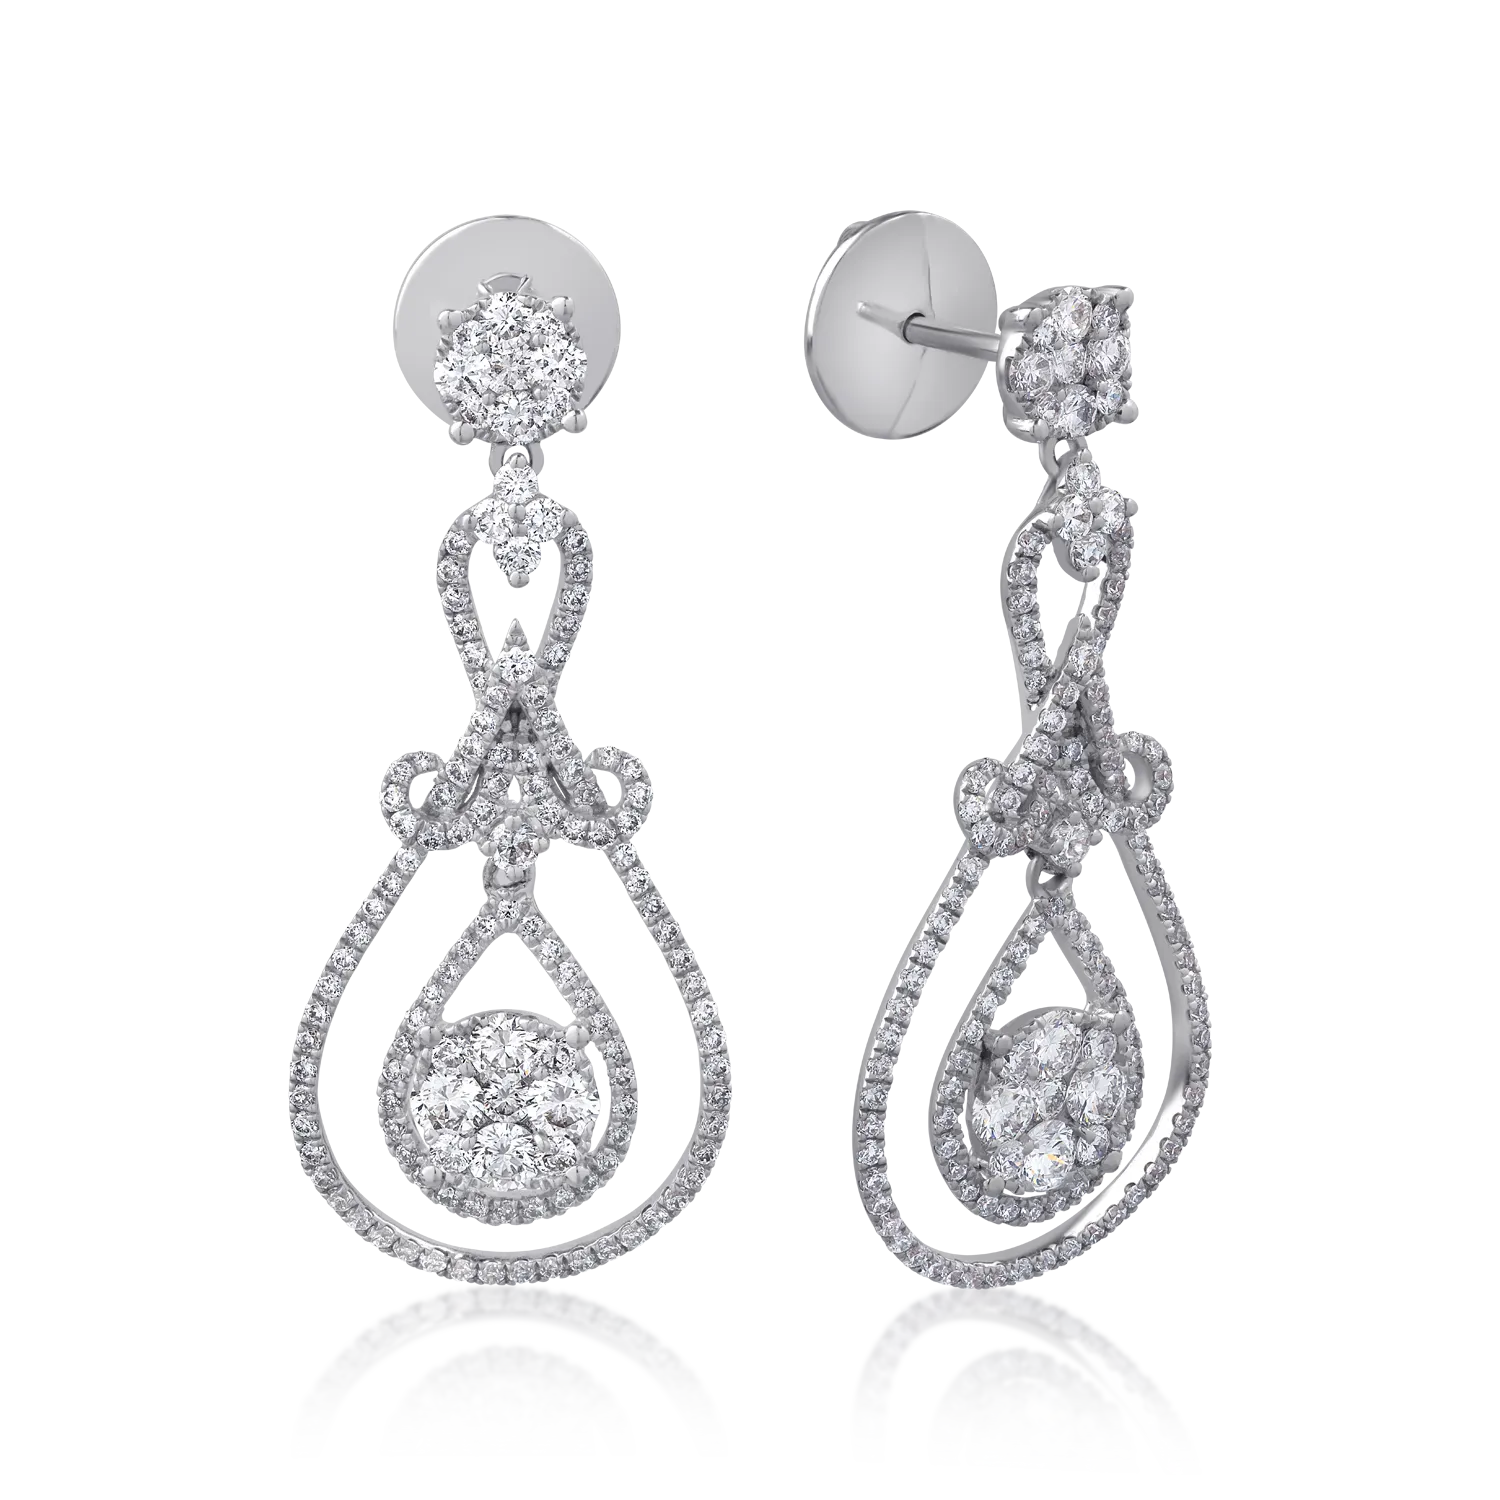 18K white gold earrings with 2.08ct diamonds